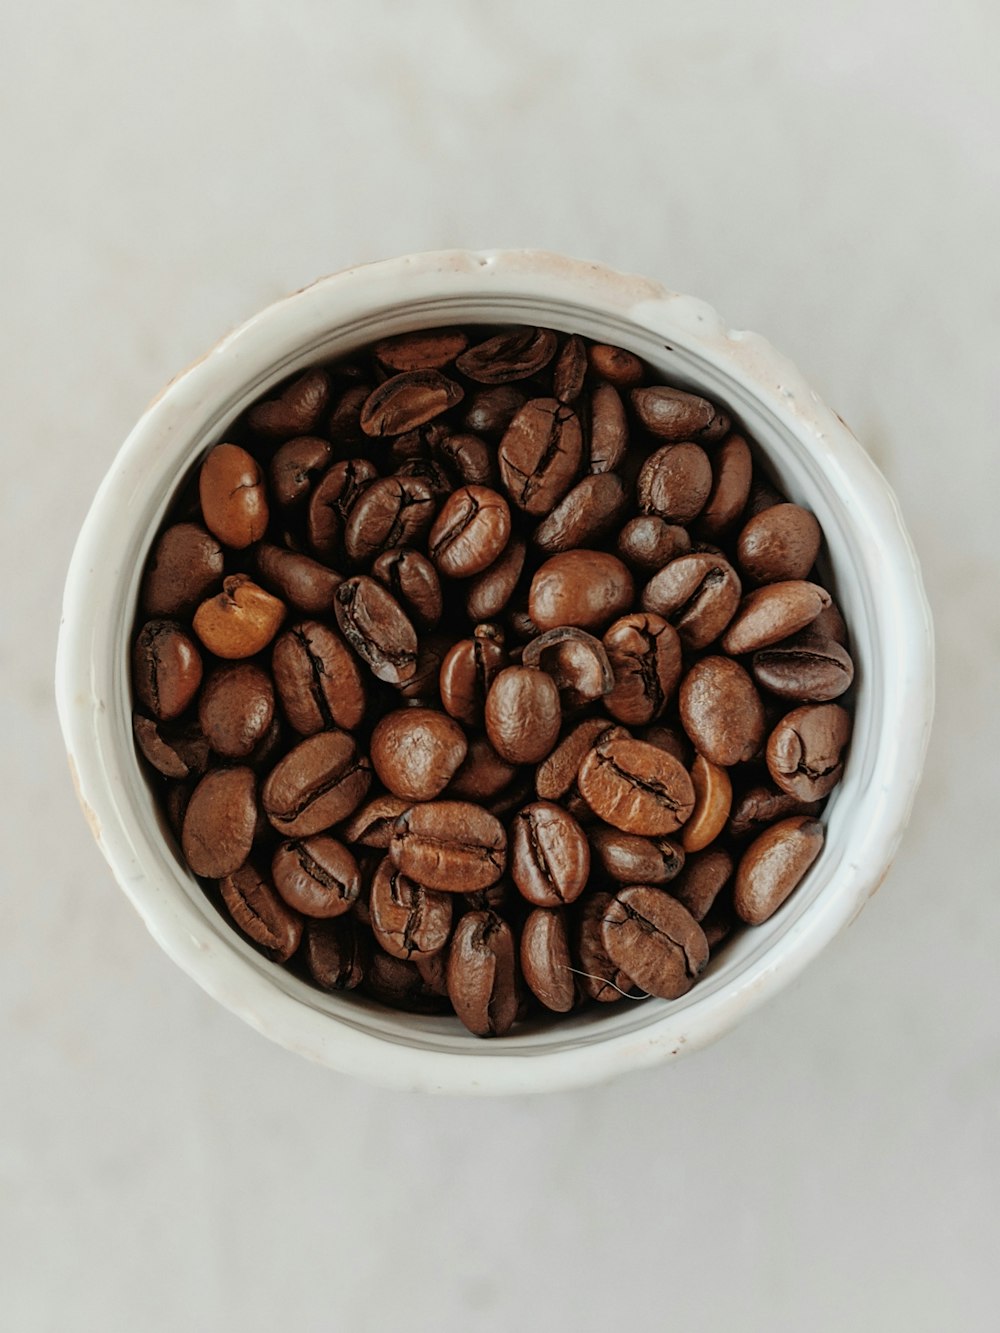 brown coffee beans in white ceramic bowl